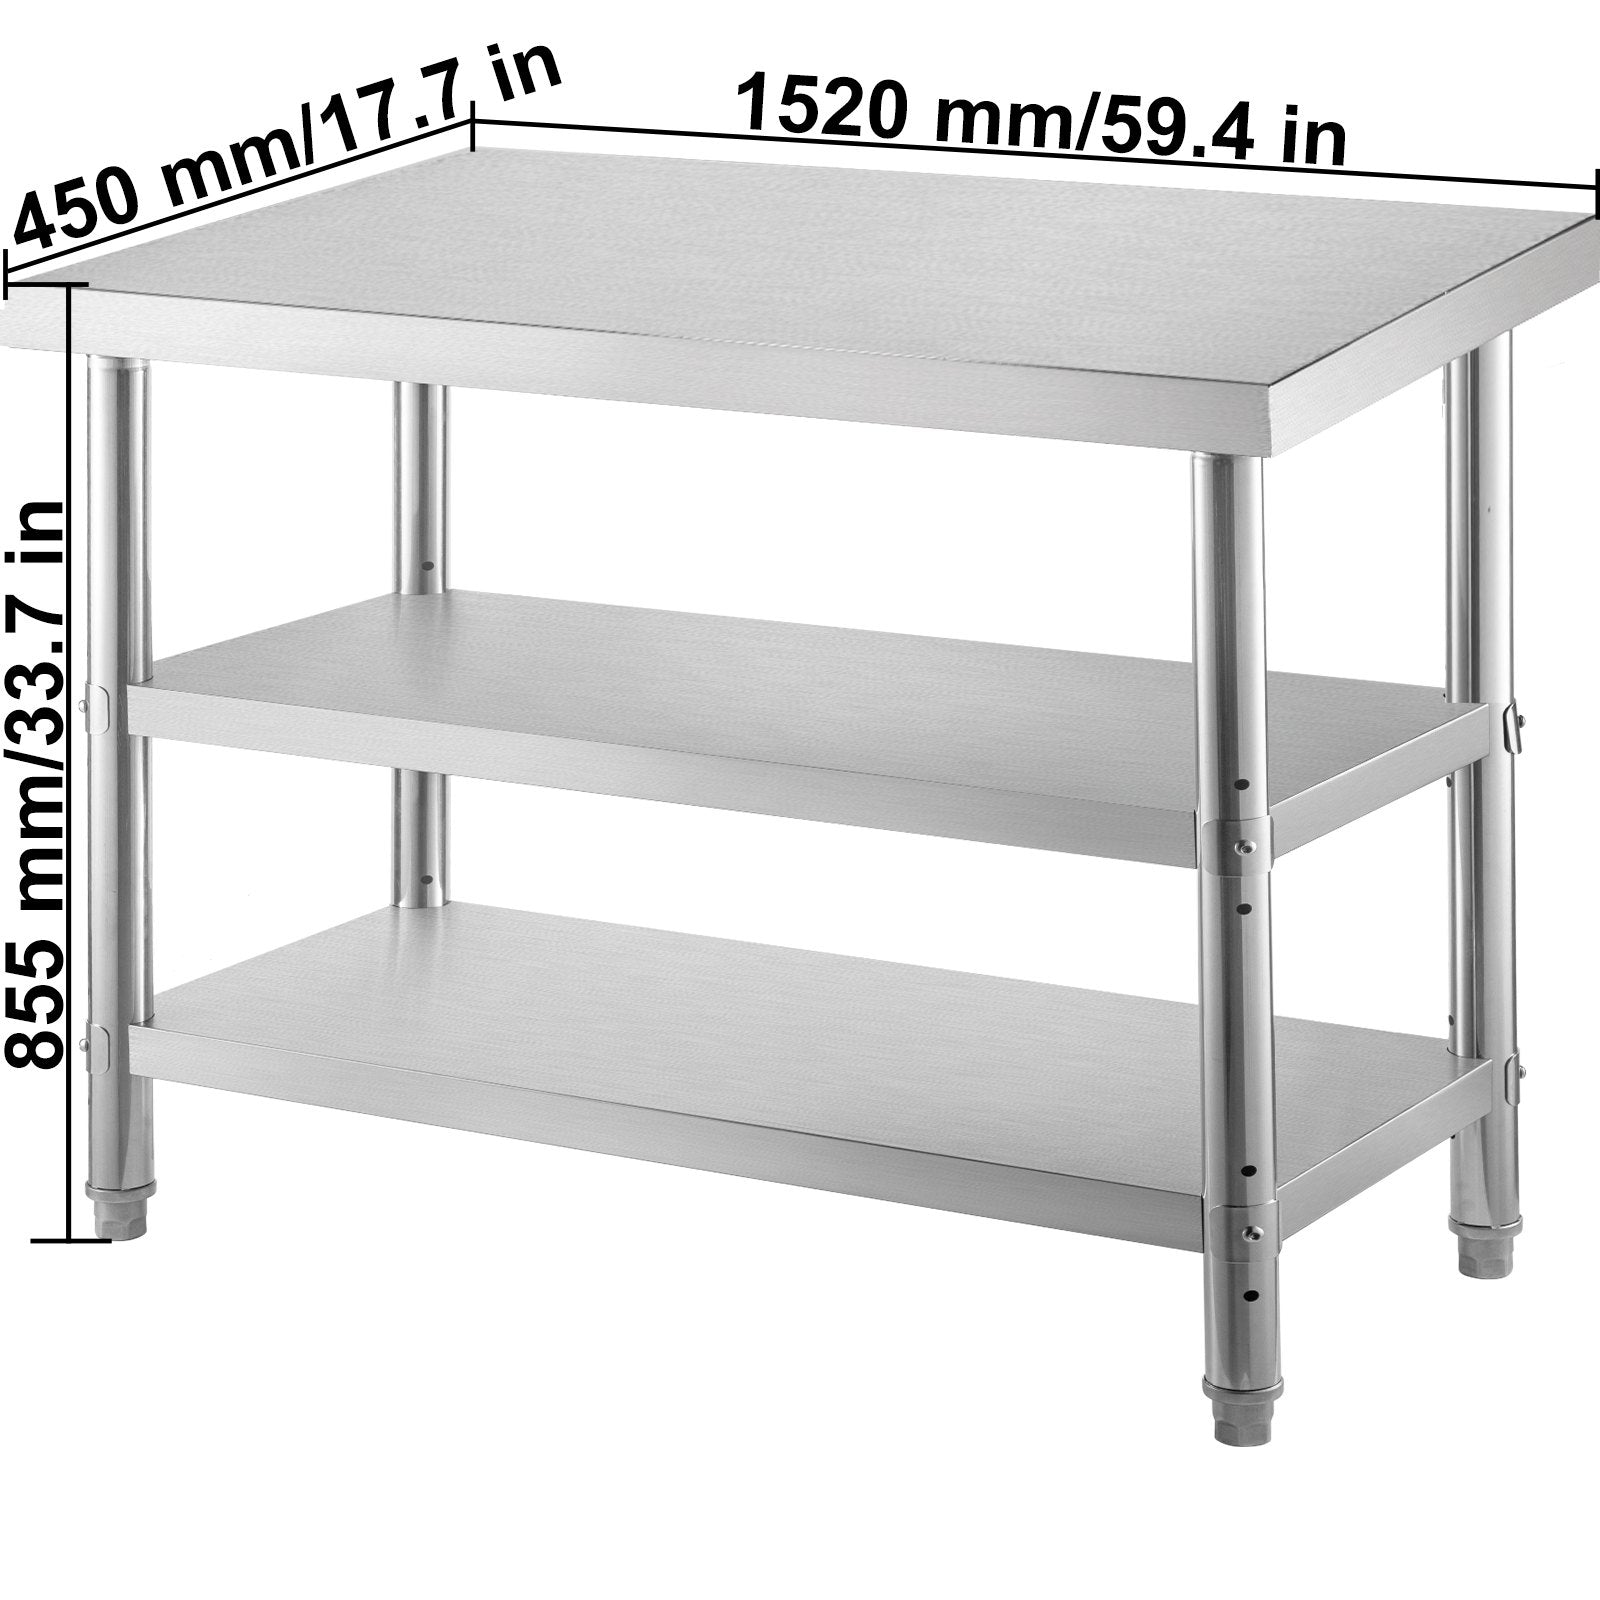 Stainless Steel Prep Table, 60x14x33 in -6